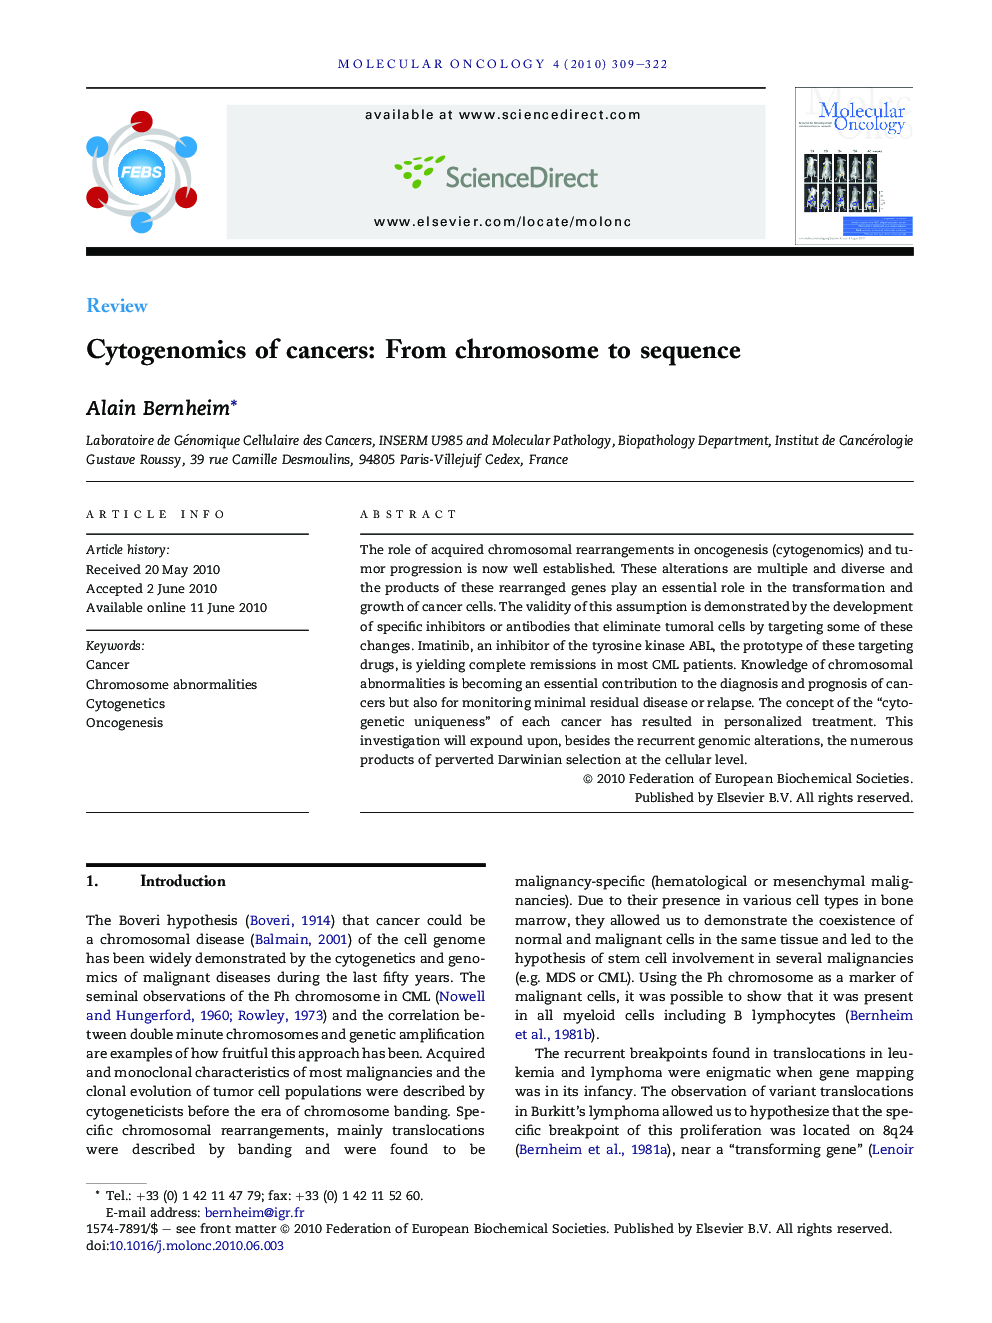 Cytogenomics of cancers: From chromosome to sequence